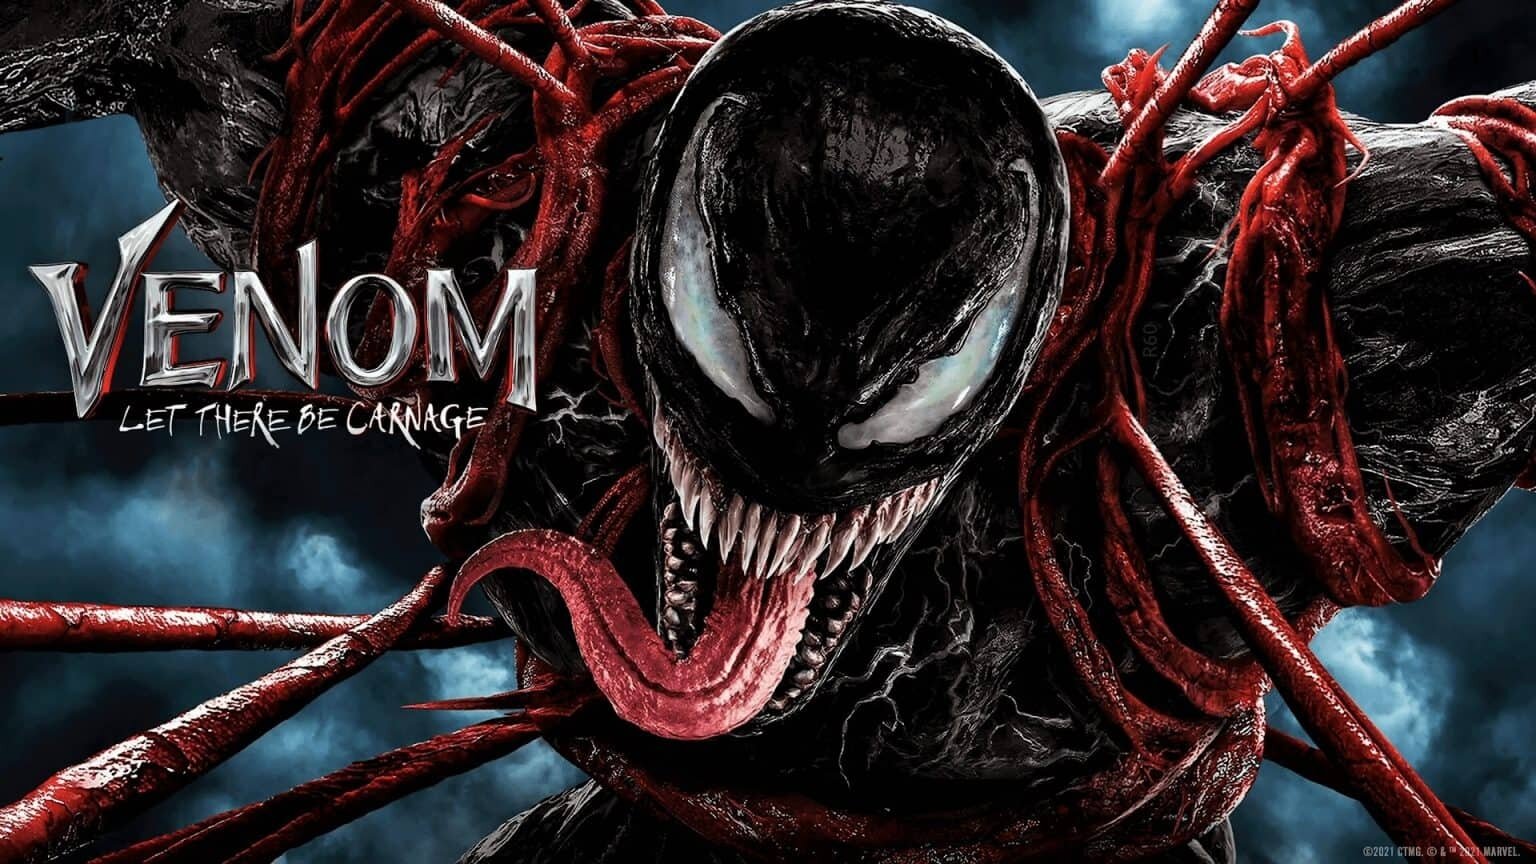 Venom-Let-There-Be-Carnage-Featured-Resize-1536x864.jpg